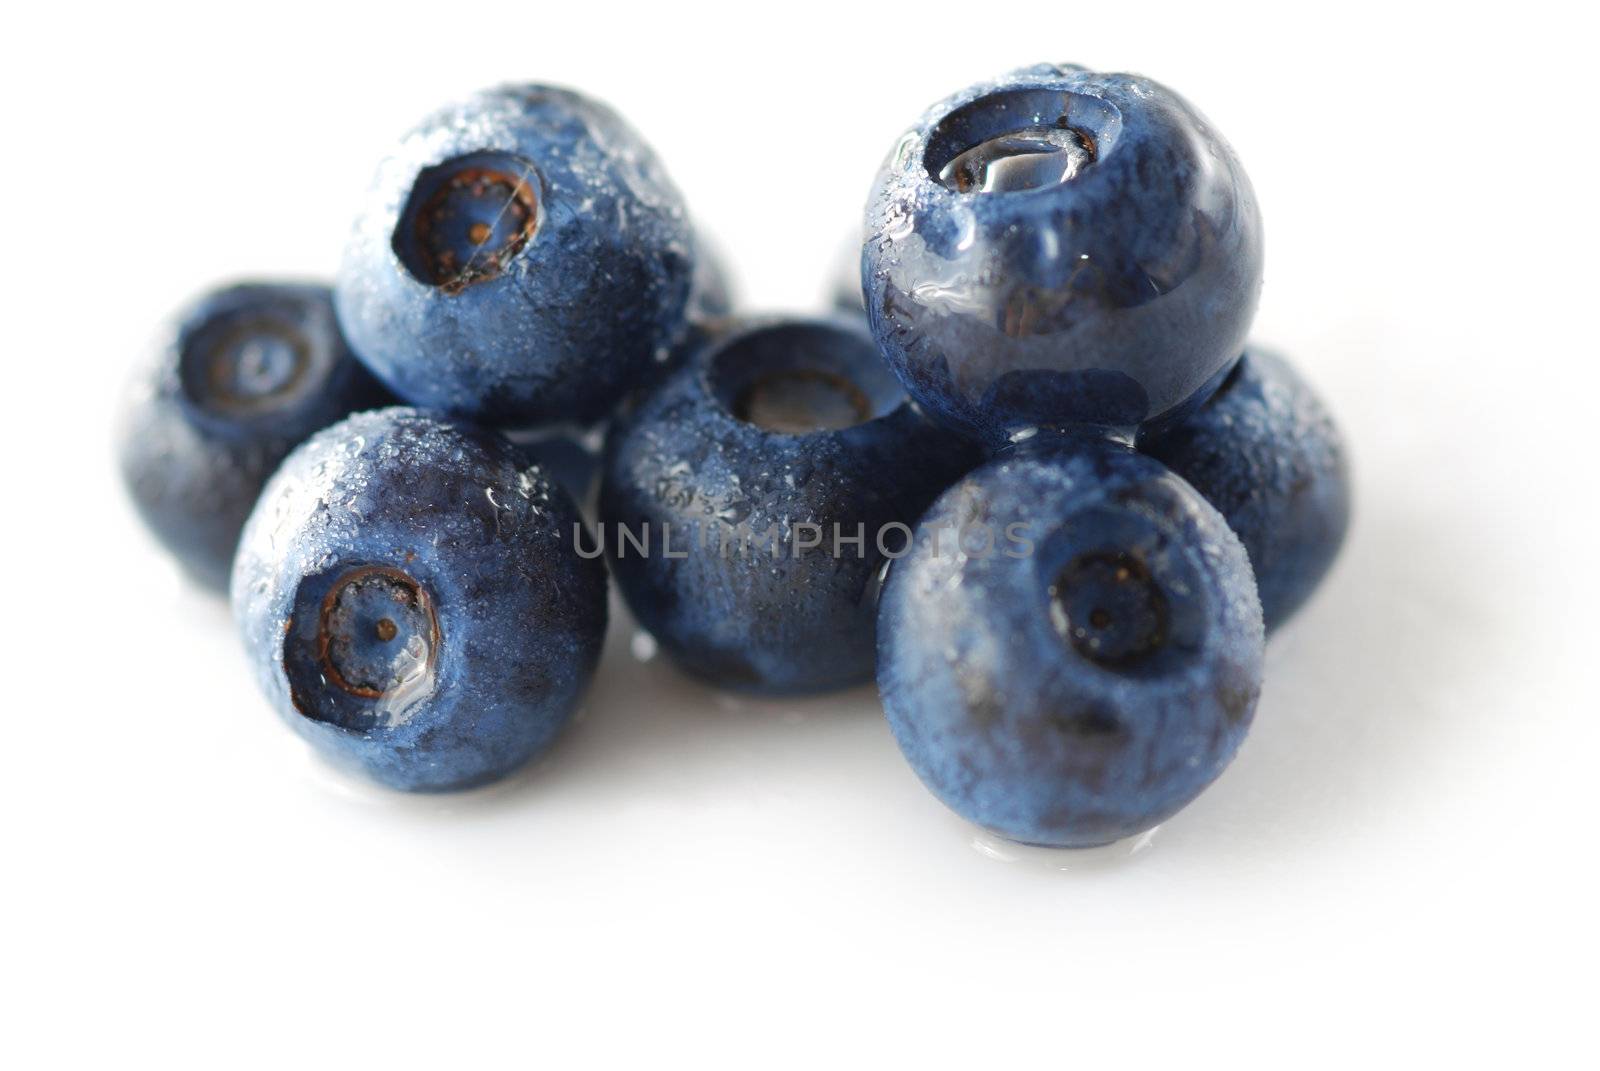 Blueberries over white background. Shallow depth of field.